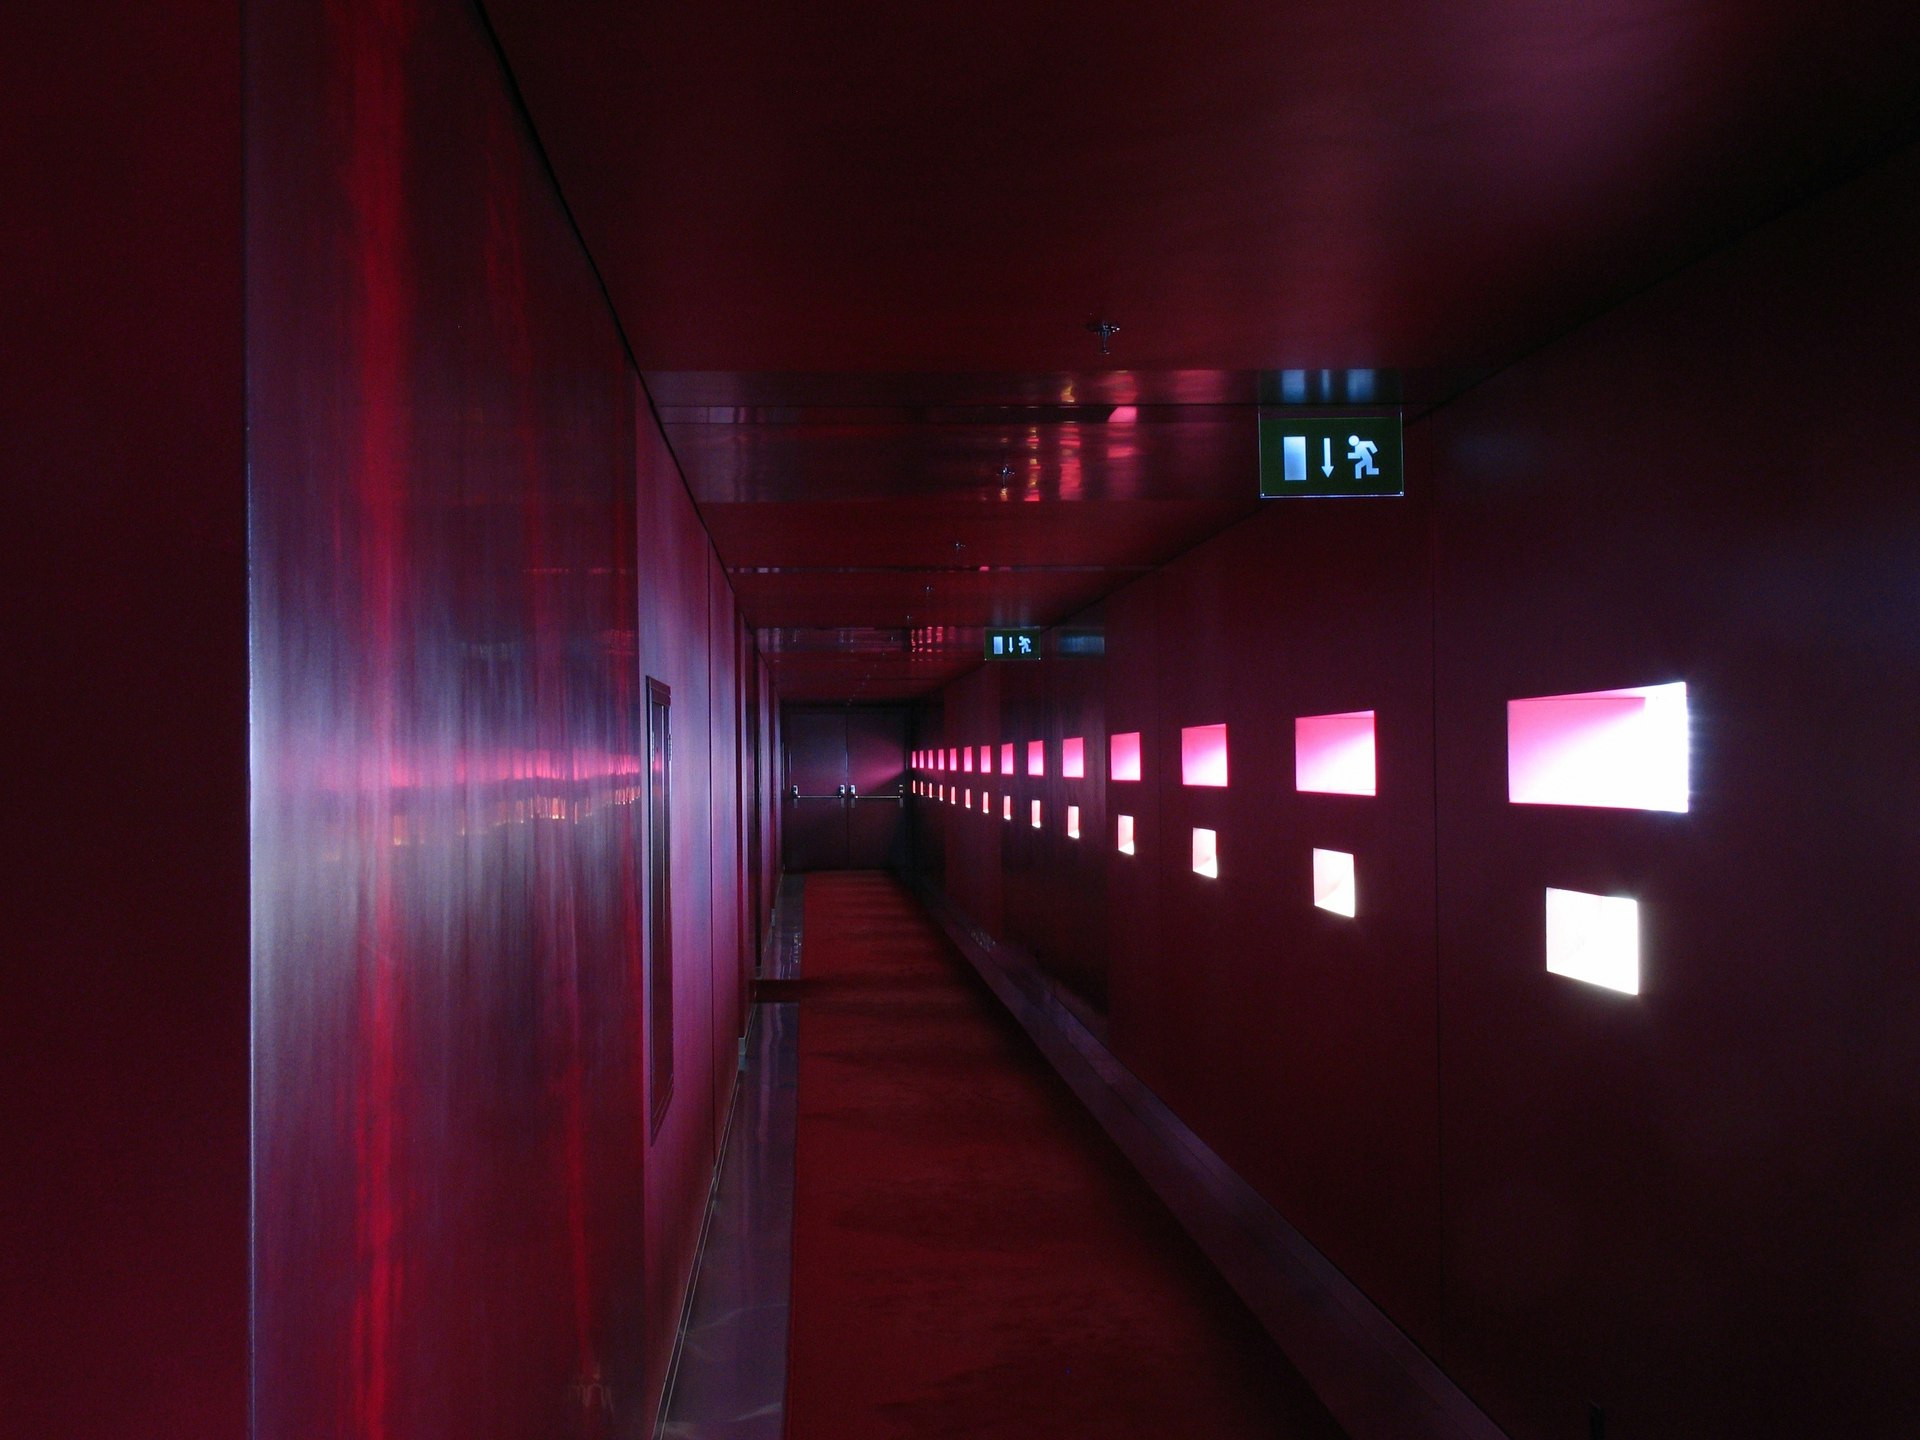 The corridors leading to the Concert Hall with the small Windows are reminiscent of a Ship.